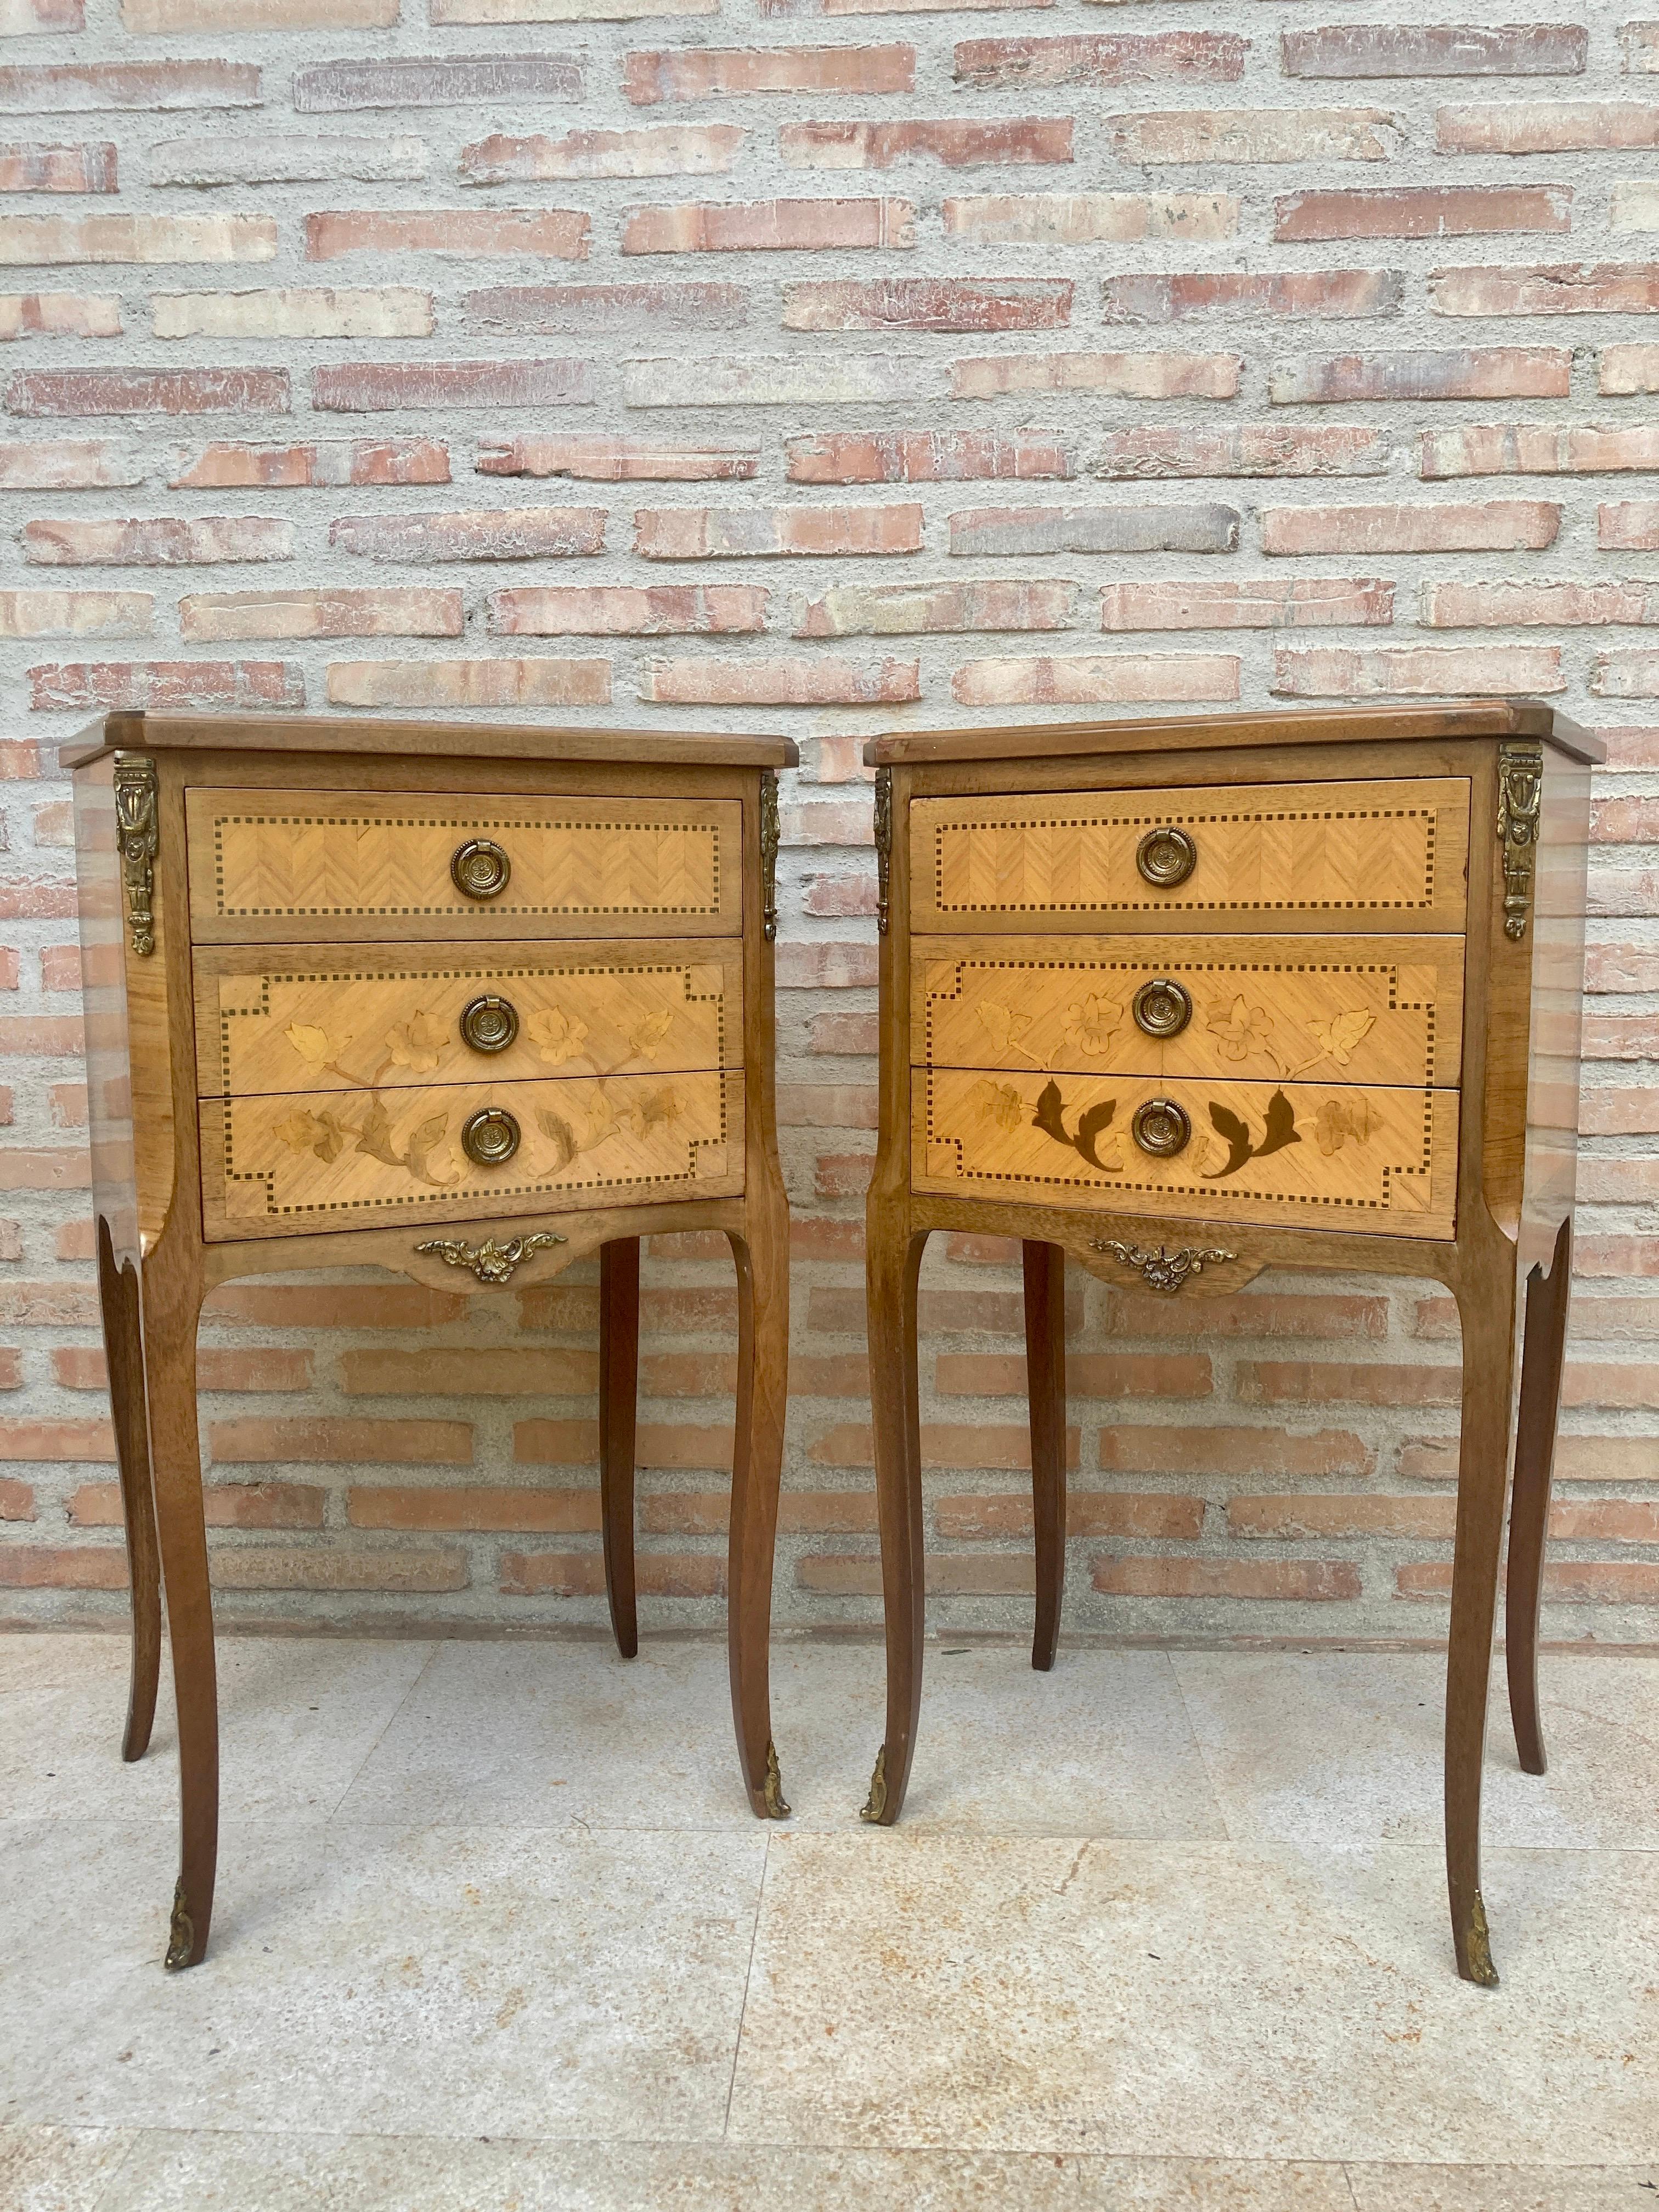 Matching Louis XV style king wooden bedside tables, the tables have three drawers, with floral marquetry on the top and front. The pieces retain their beautiful original covers of floral marquetry and diamond patterns, are adorned with highly